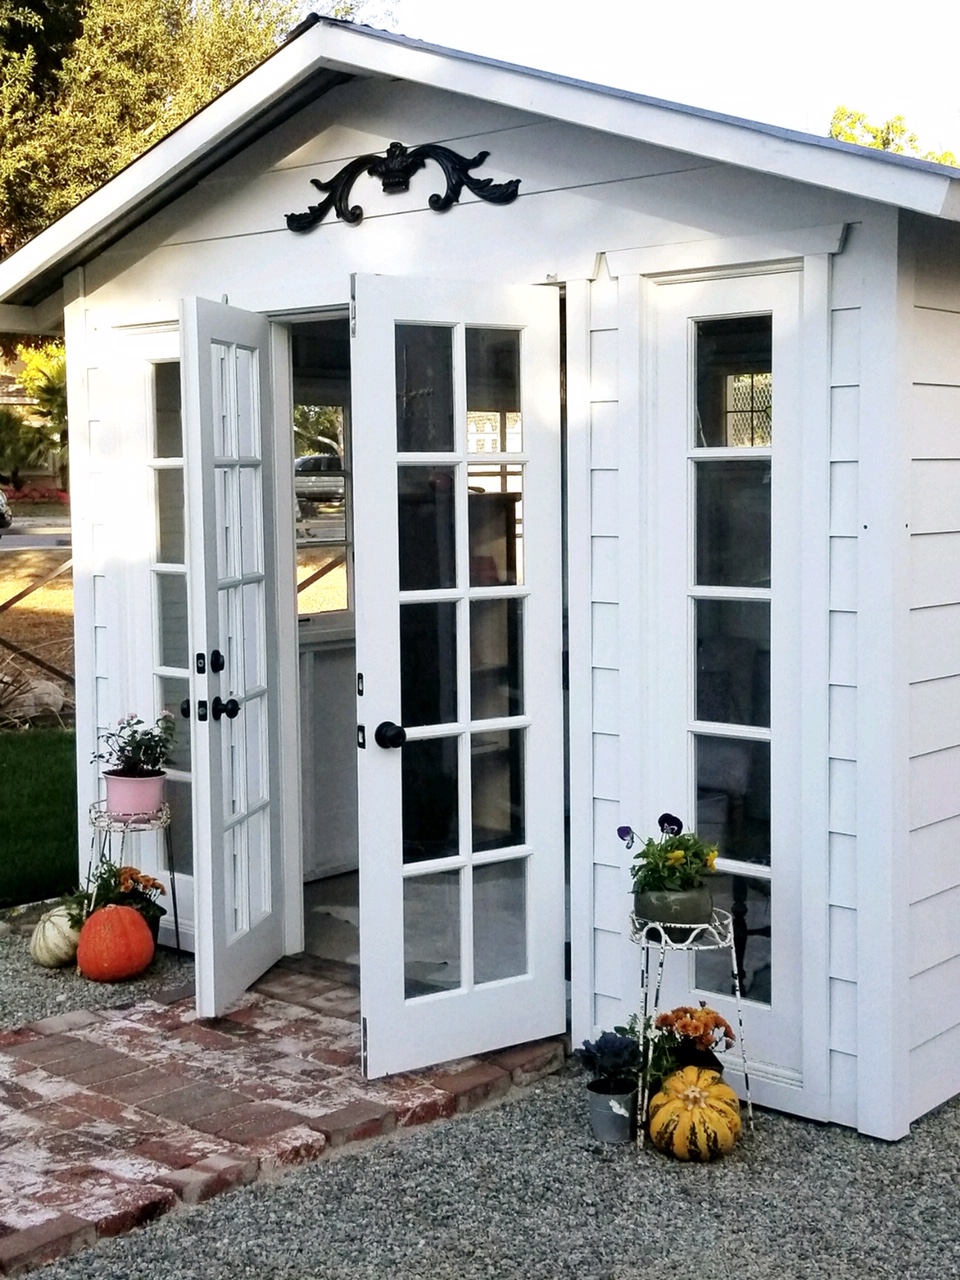 Gallery - She Shed Living